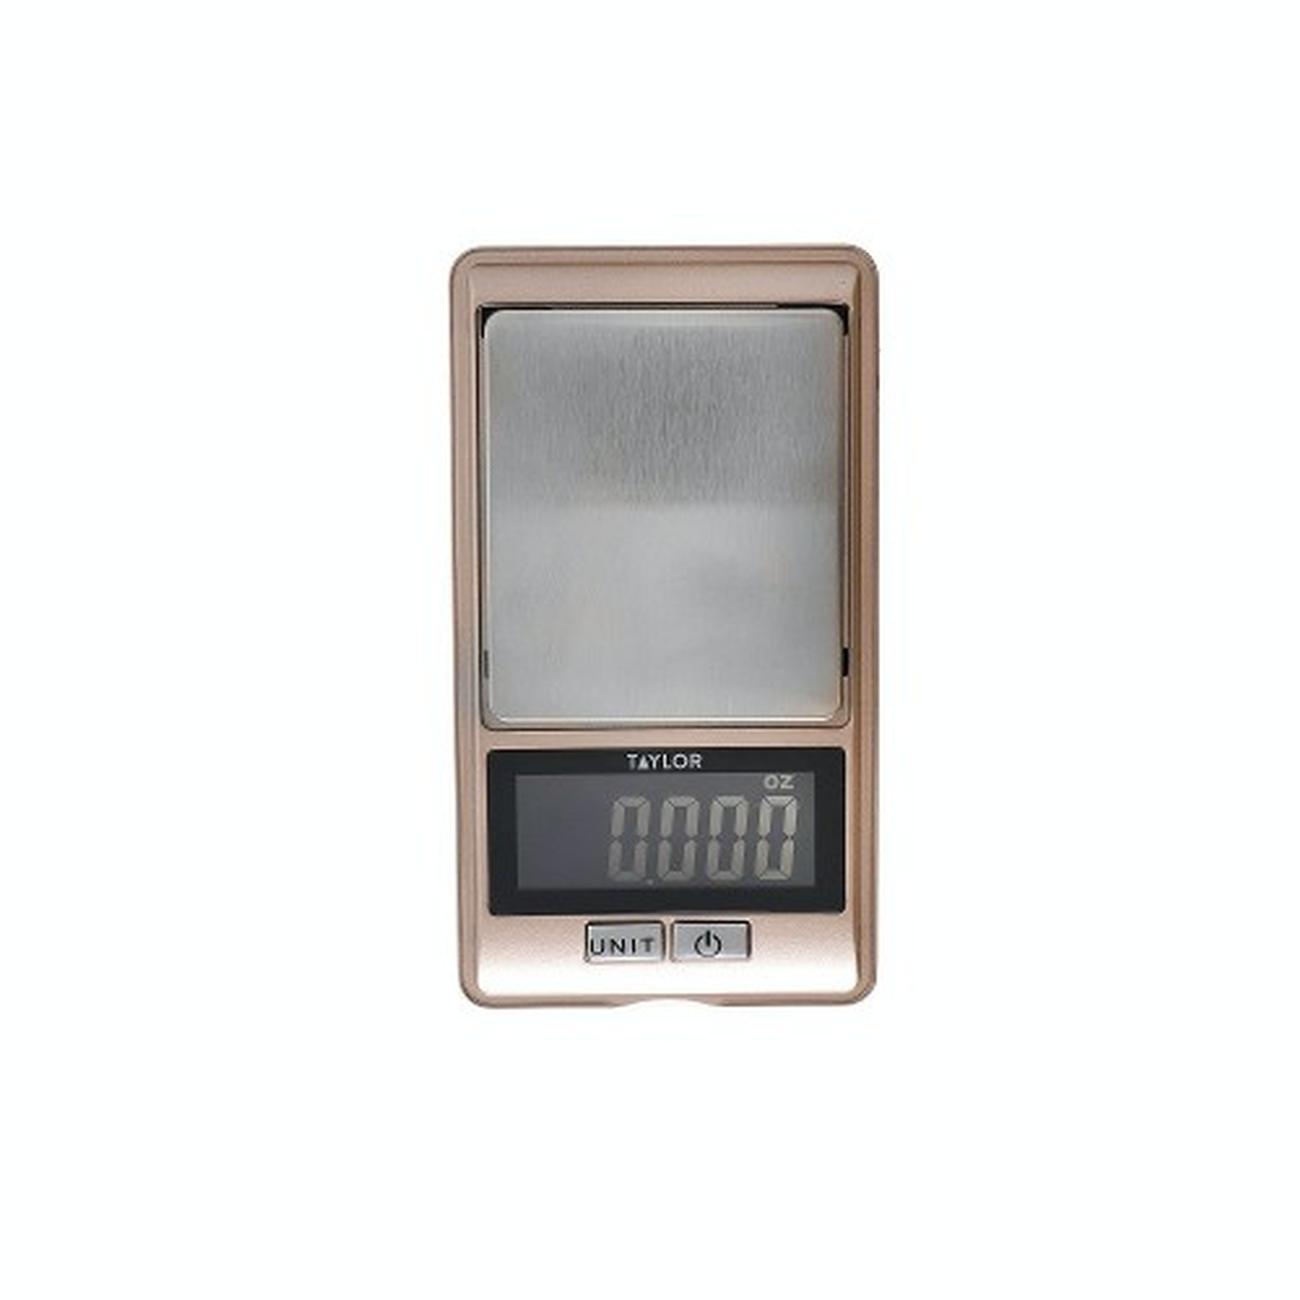 https://www.thekitchenwhisk.ie/contentfiles/productImages/Large/Taylor-Pro-Ultra-Precision-Gram-Scales-500g-Weighing-Capacity.jpg